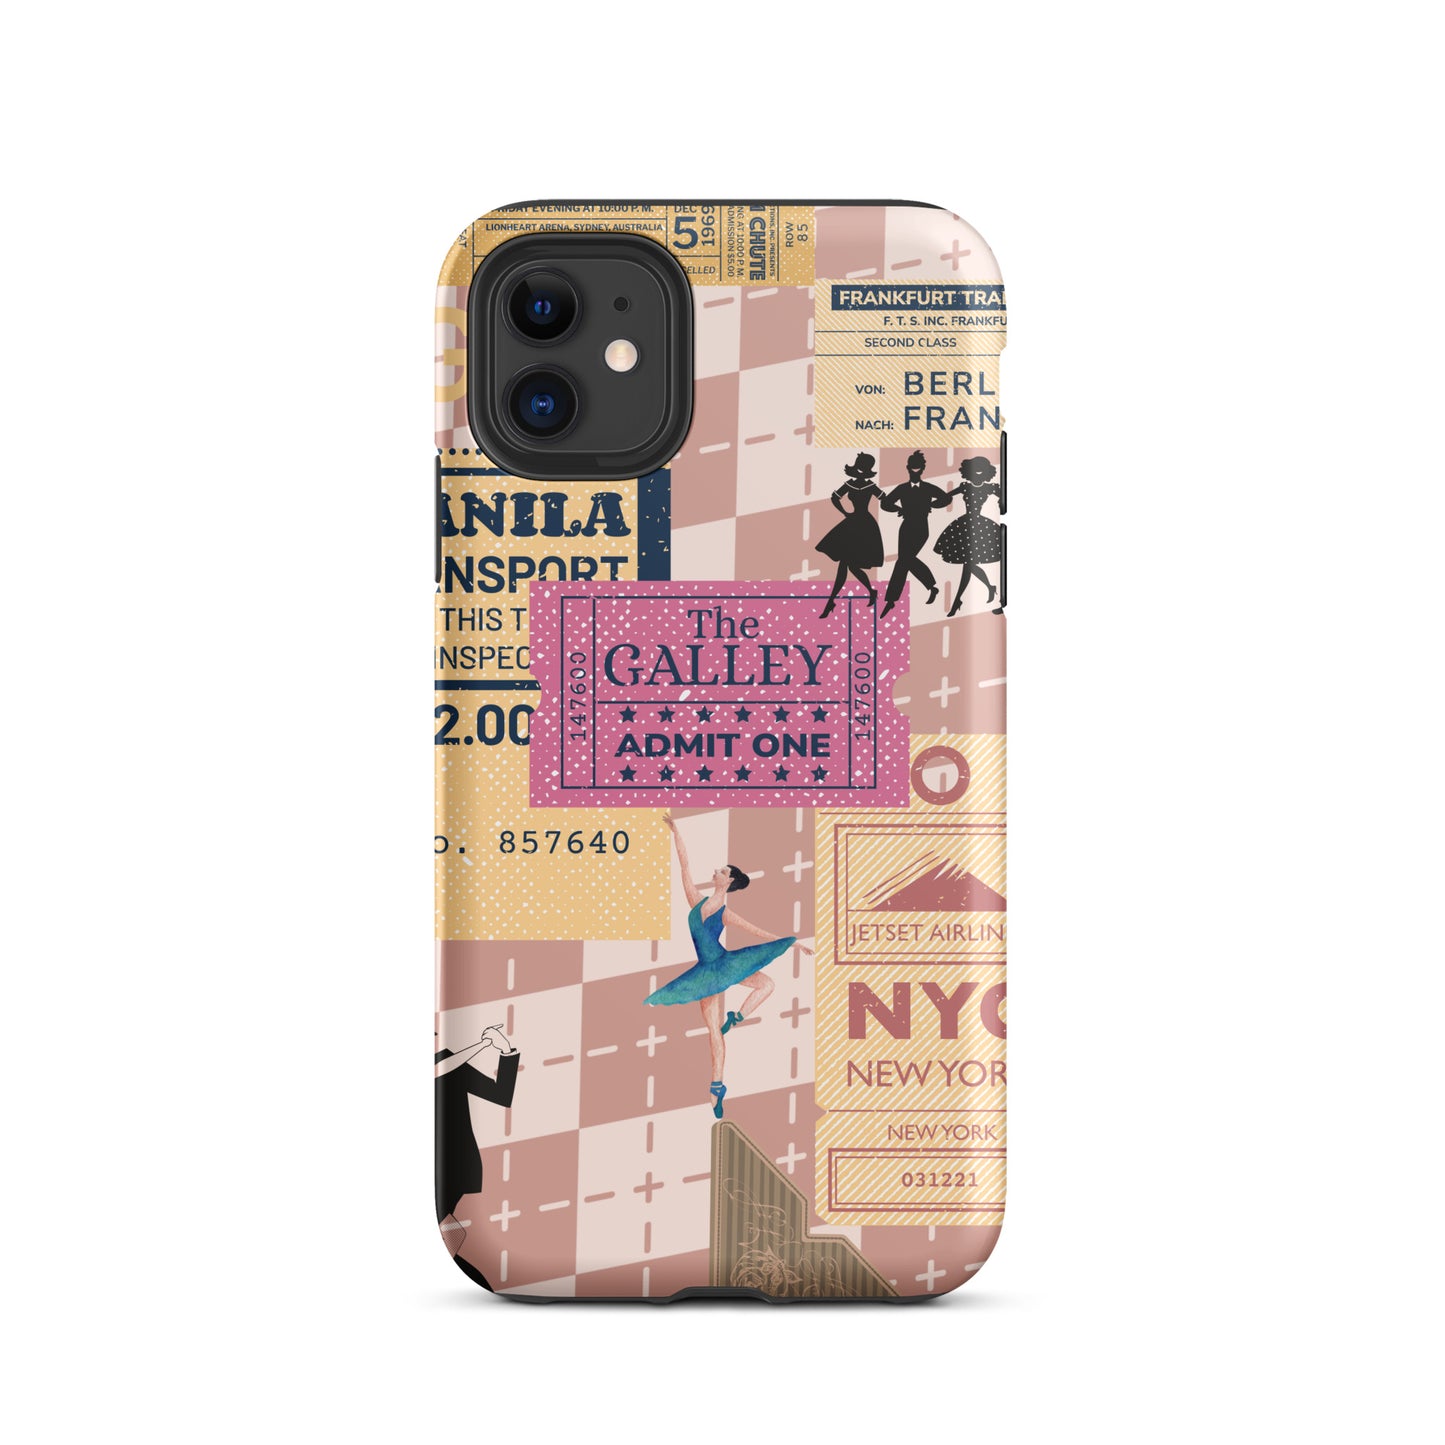 Aesthetic iPhone Case for Dancers